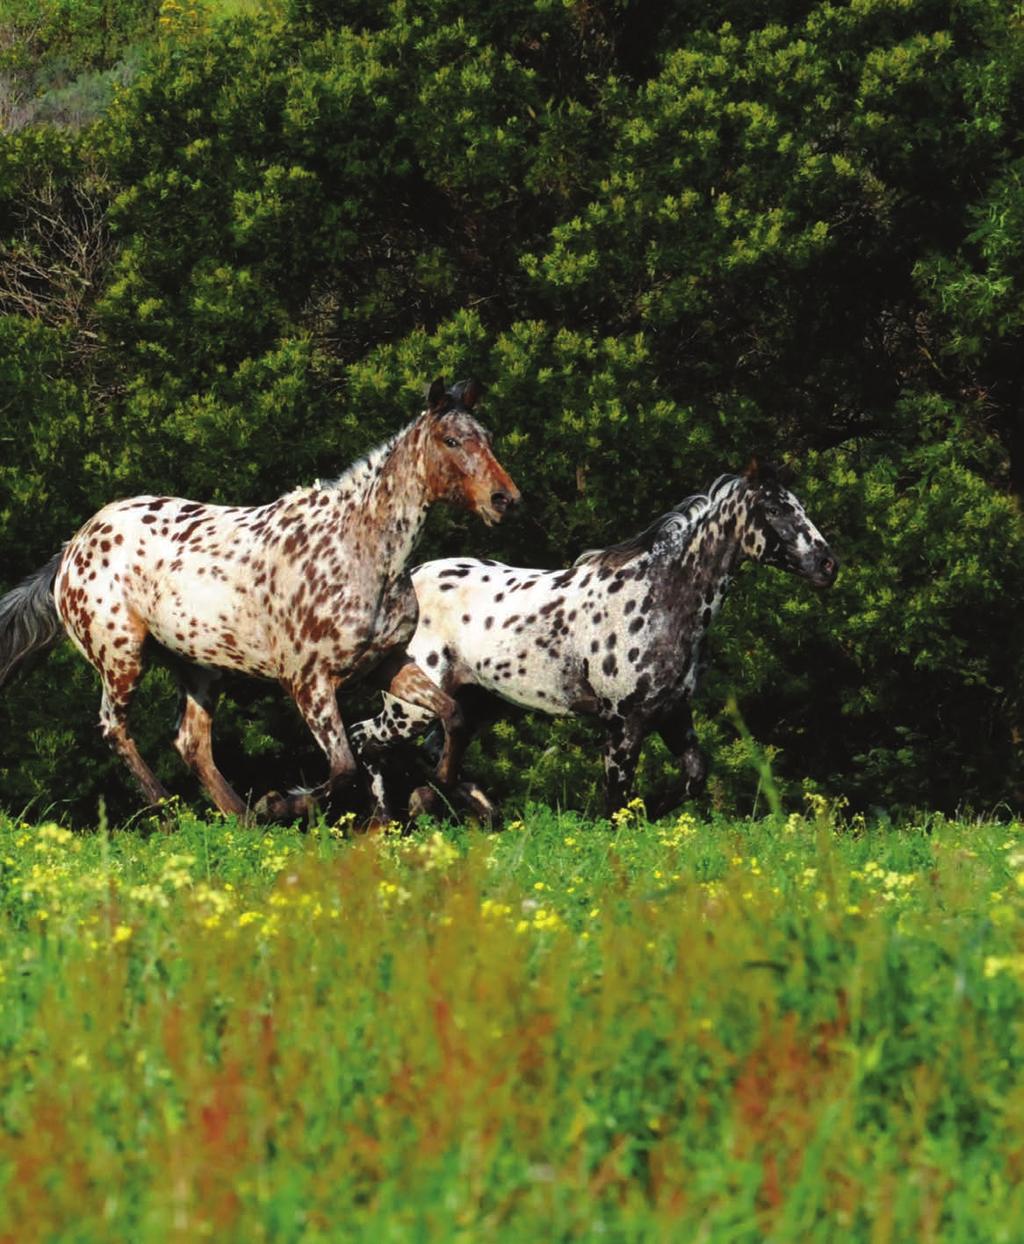 From right to left): Painted Mosaic (2008 Appaloosa Sport Horse